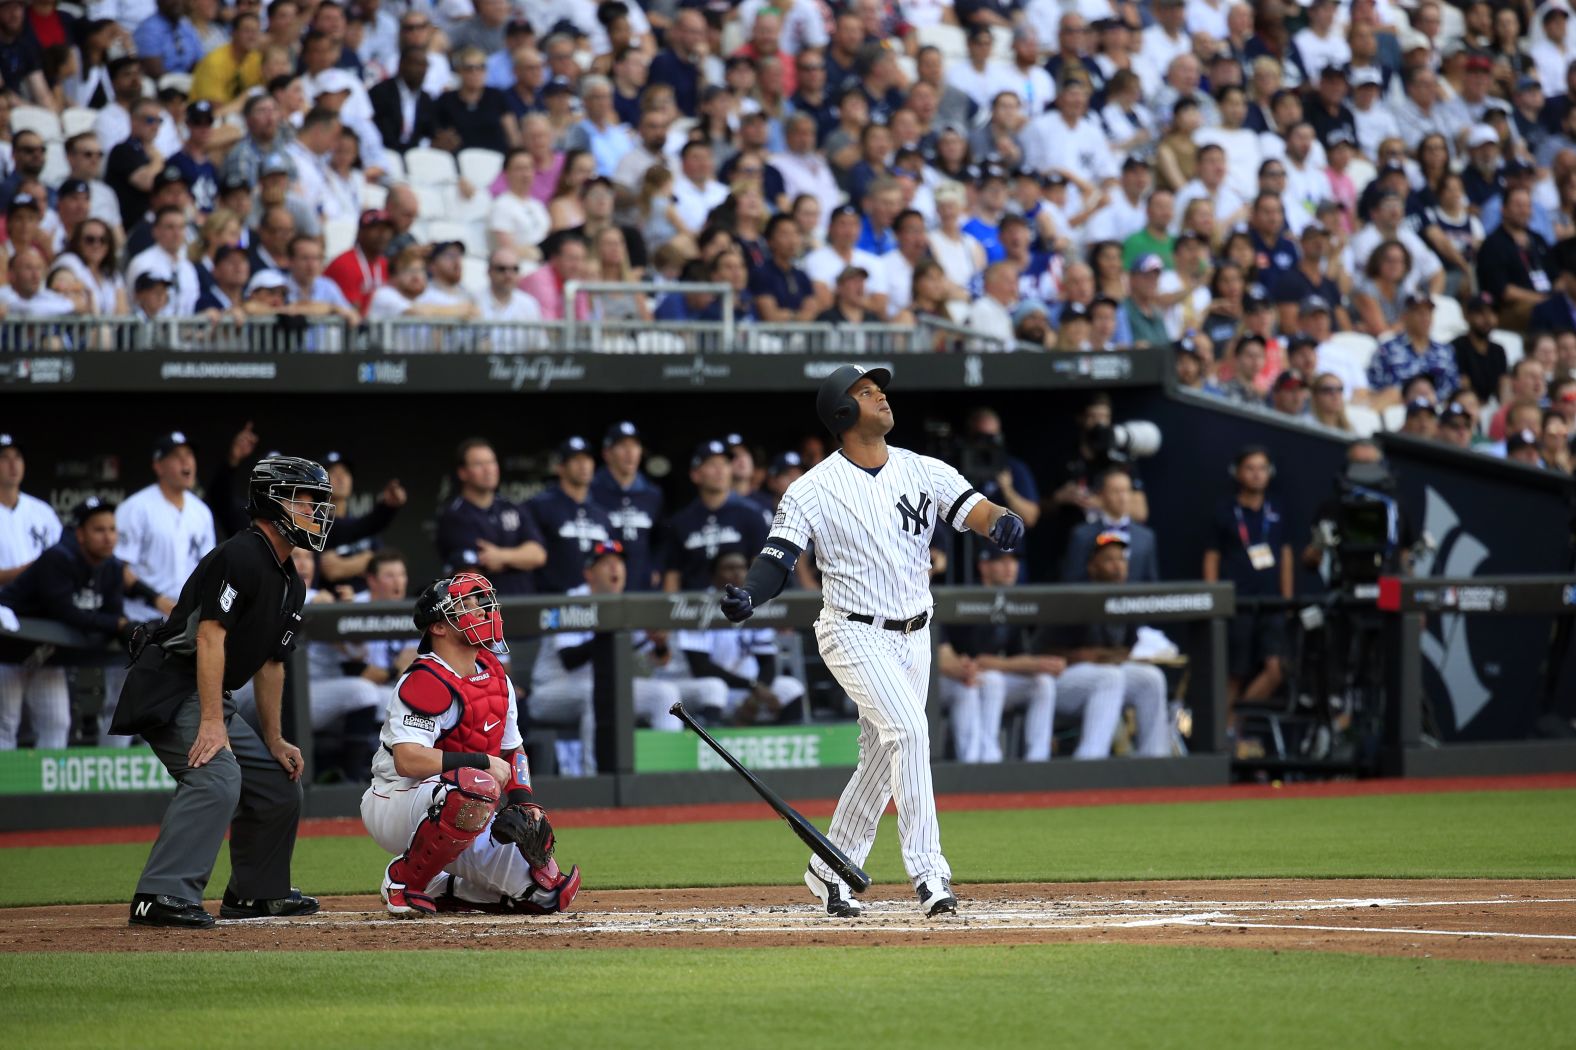 New York Yankees outfielder Aaron Hicks hits a two-run home run in the first inning of game one on June 29.